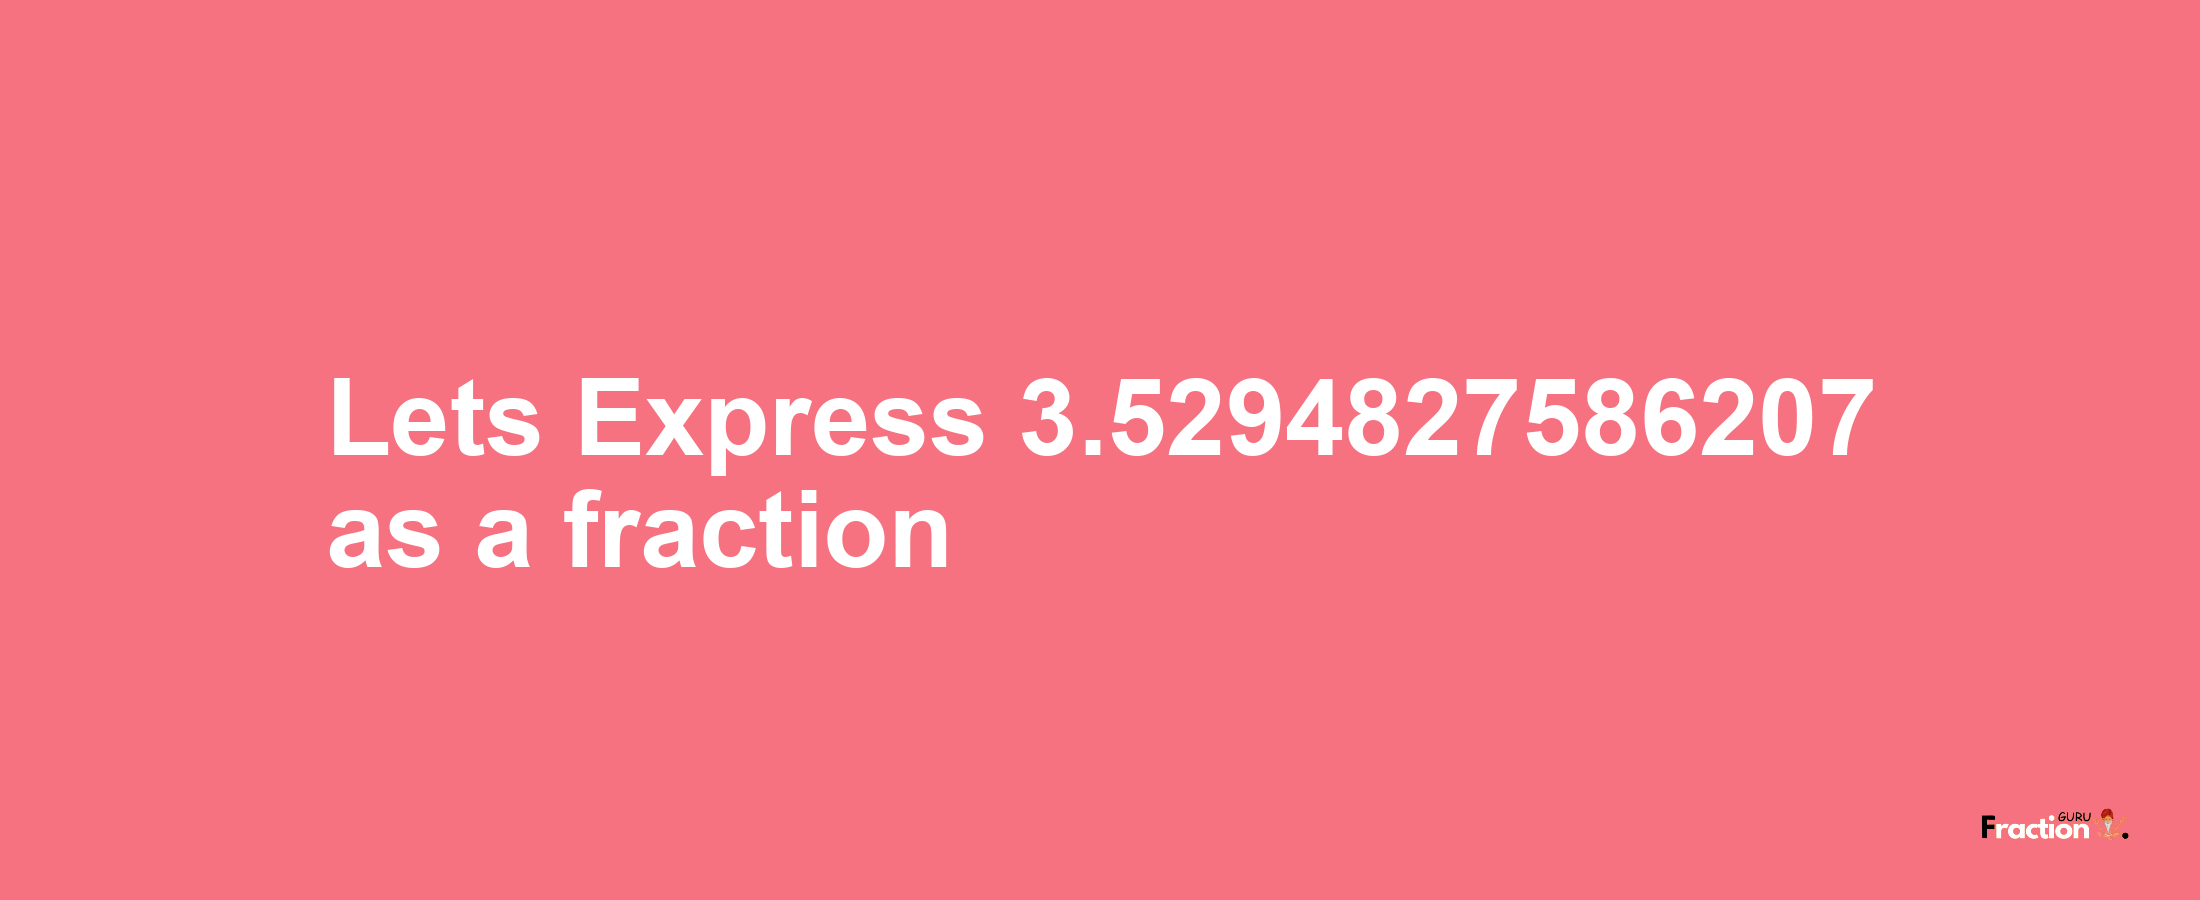 Lets Express 3.5294827586207 as afraction